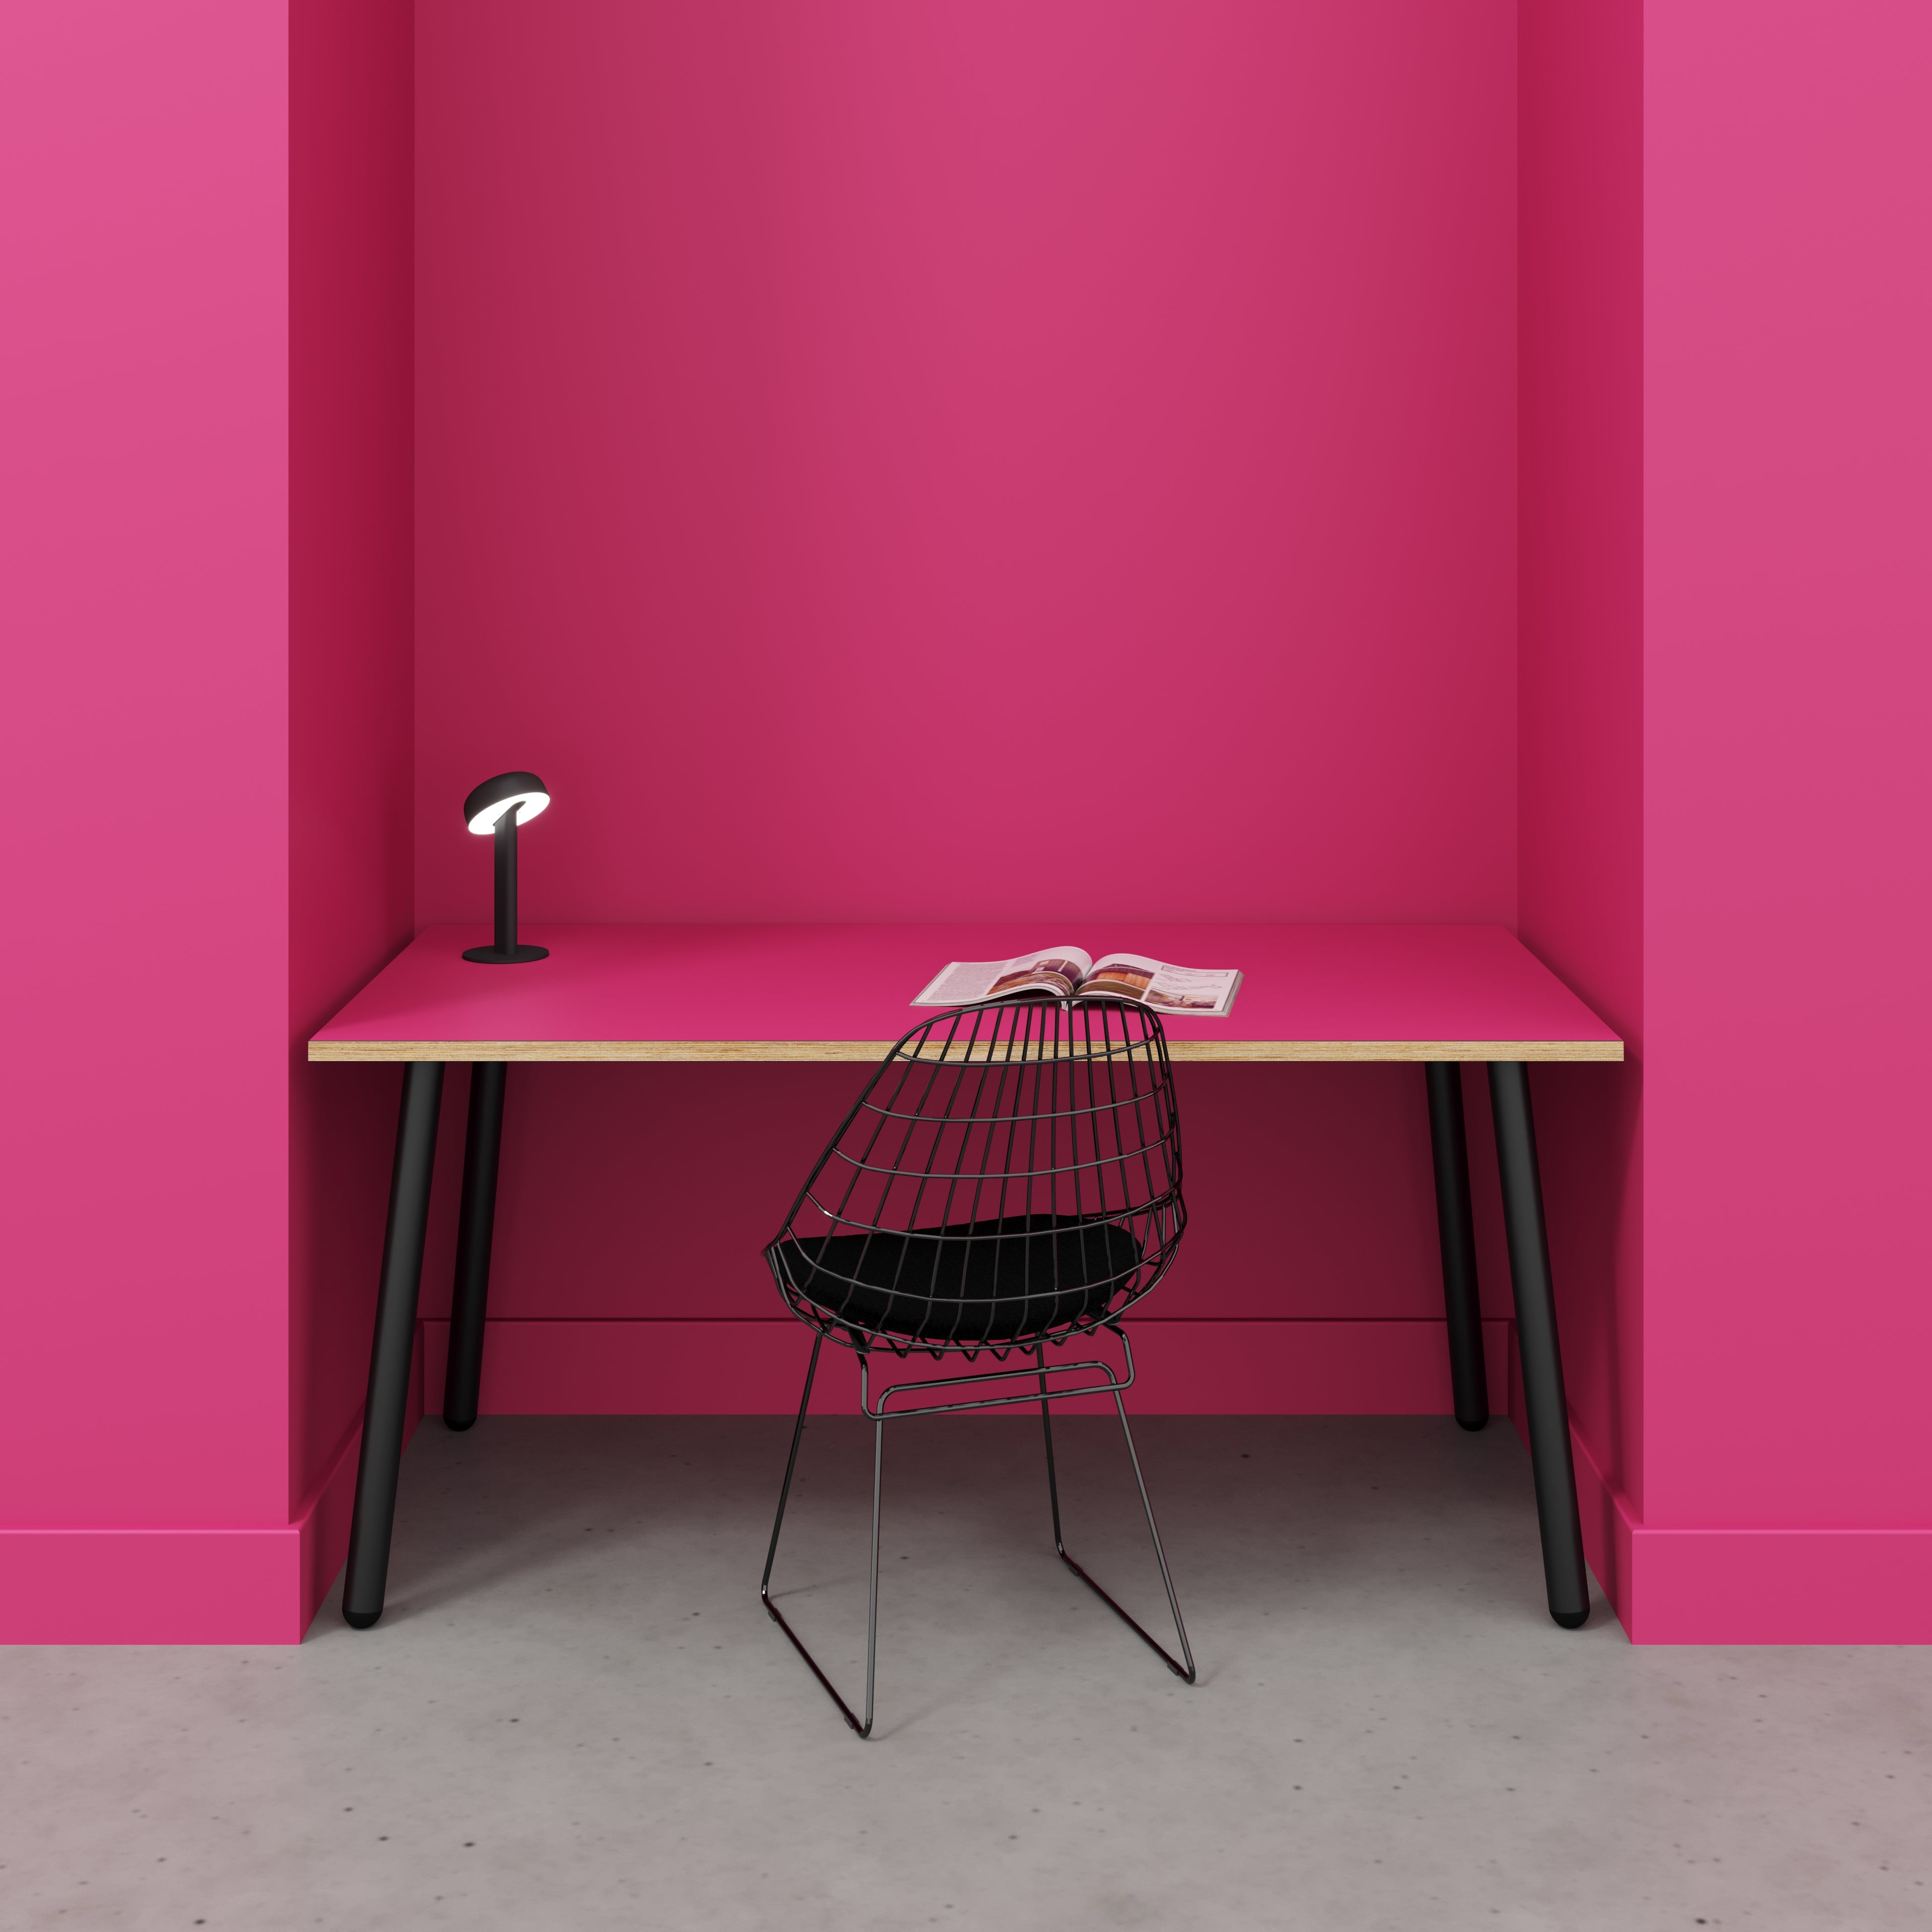 Desk with Black Round Single Pin Legs - Formica Juicy Pink - 1600(w) x 800(d) x 735(h)